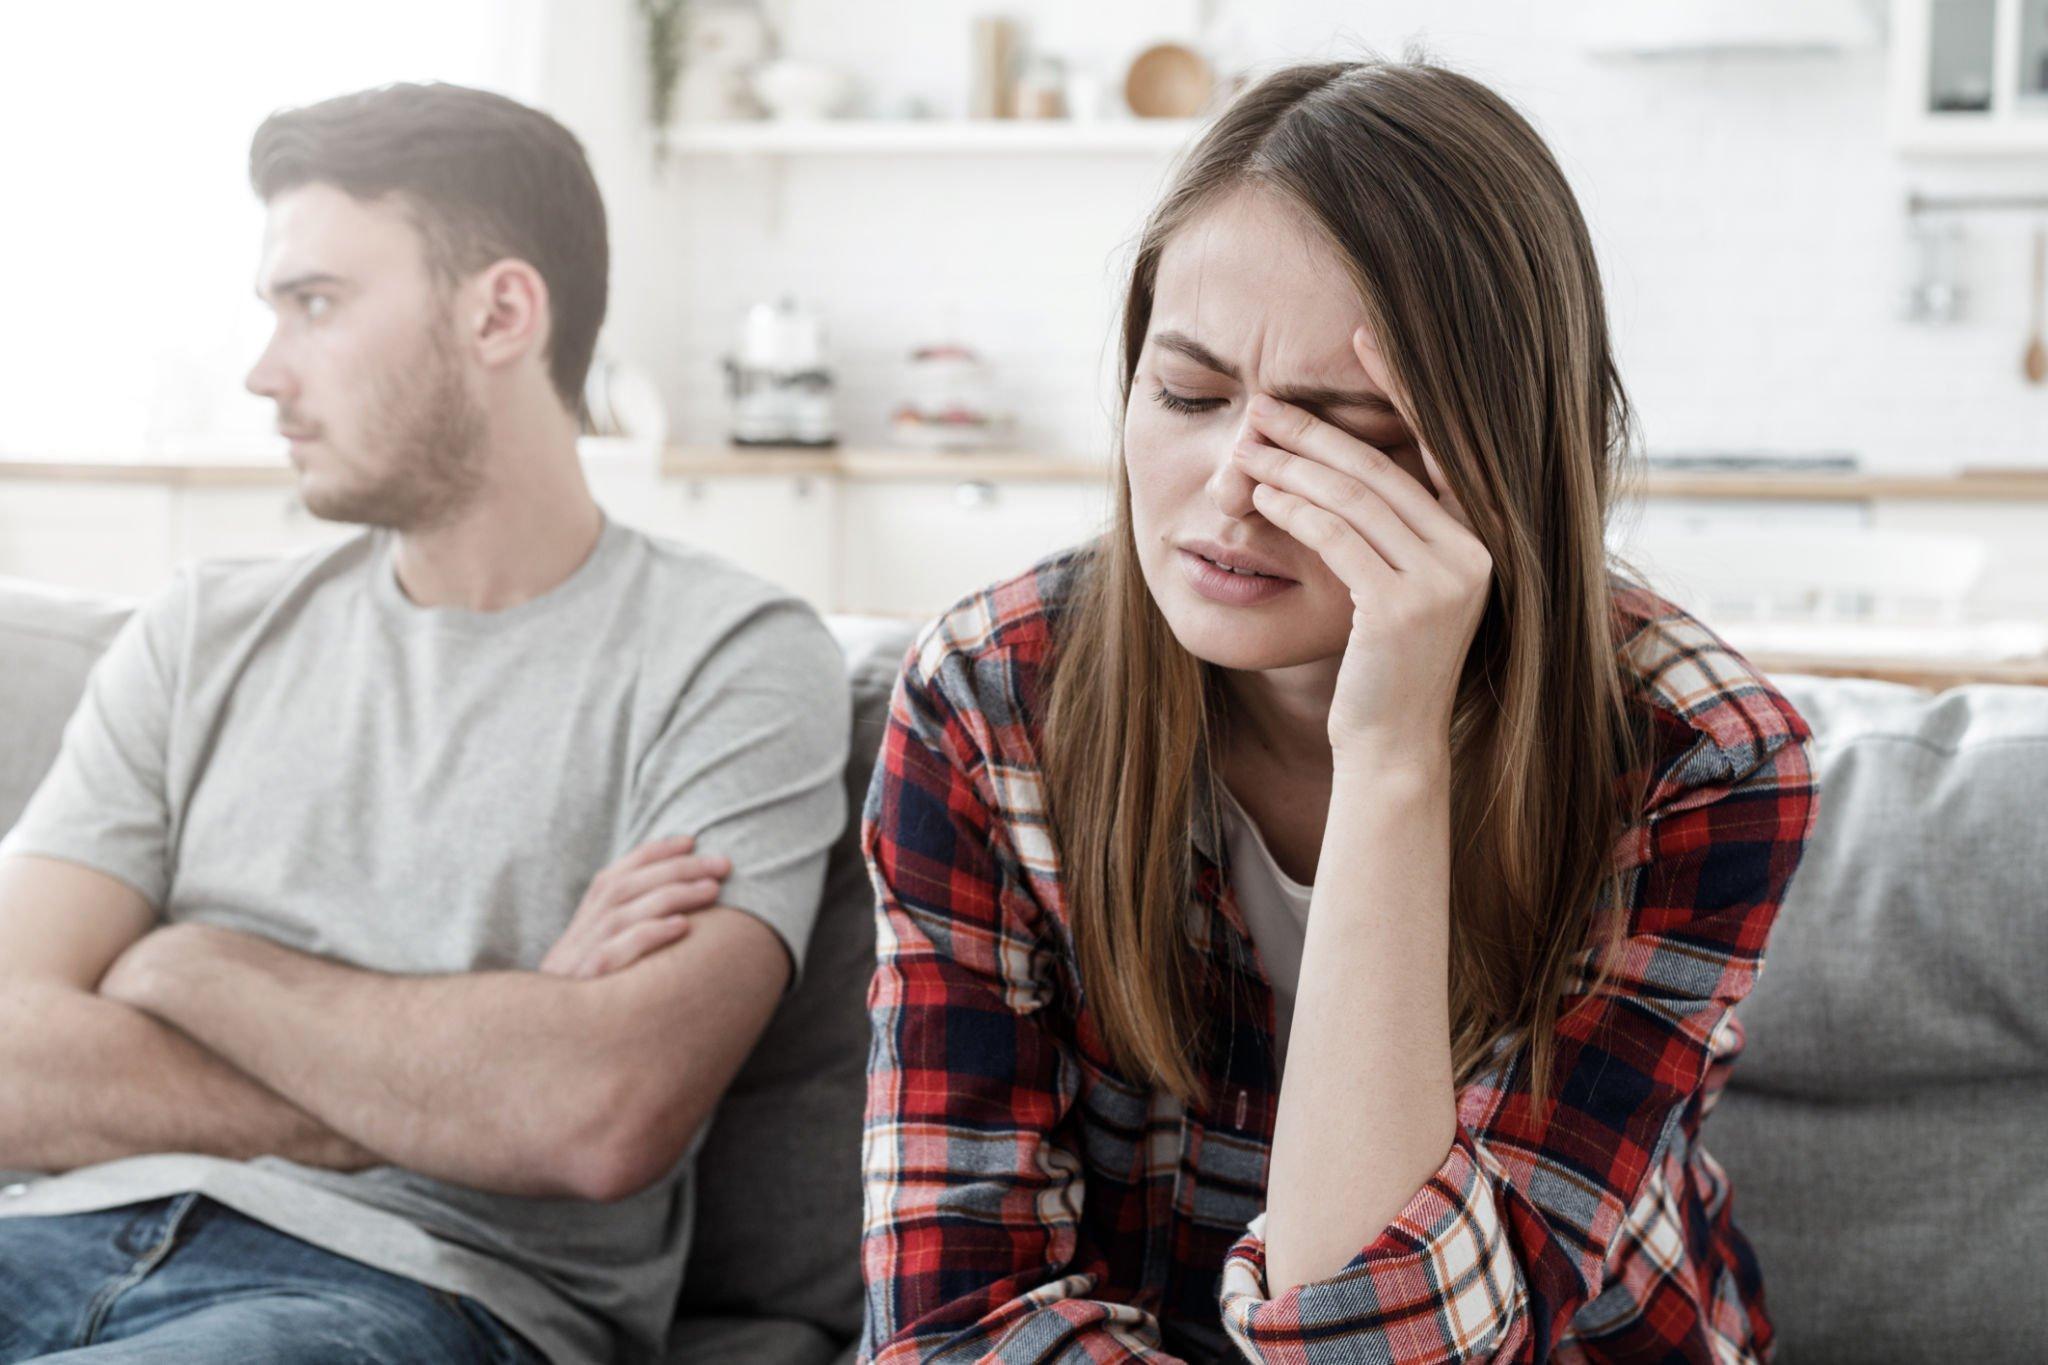 Risk Factors and Signs that Indicate You Are in An Abusive Relationship